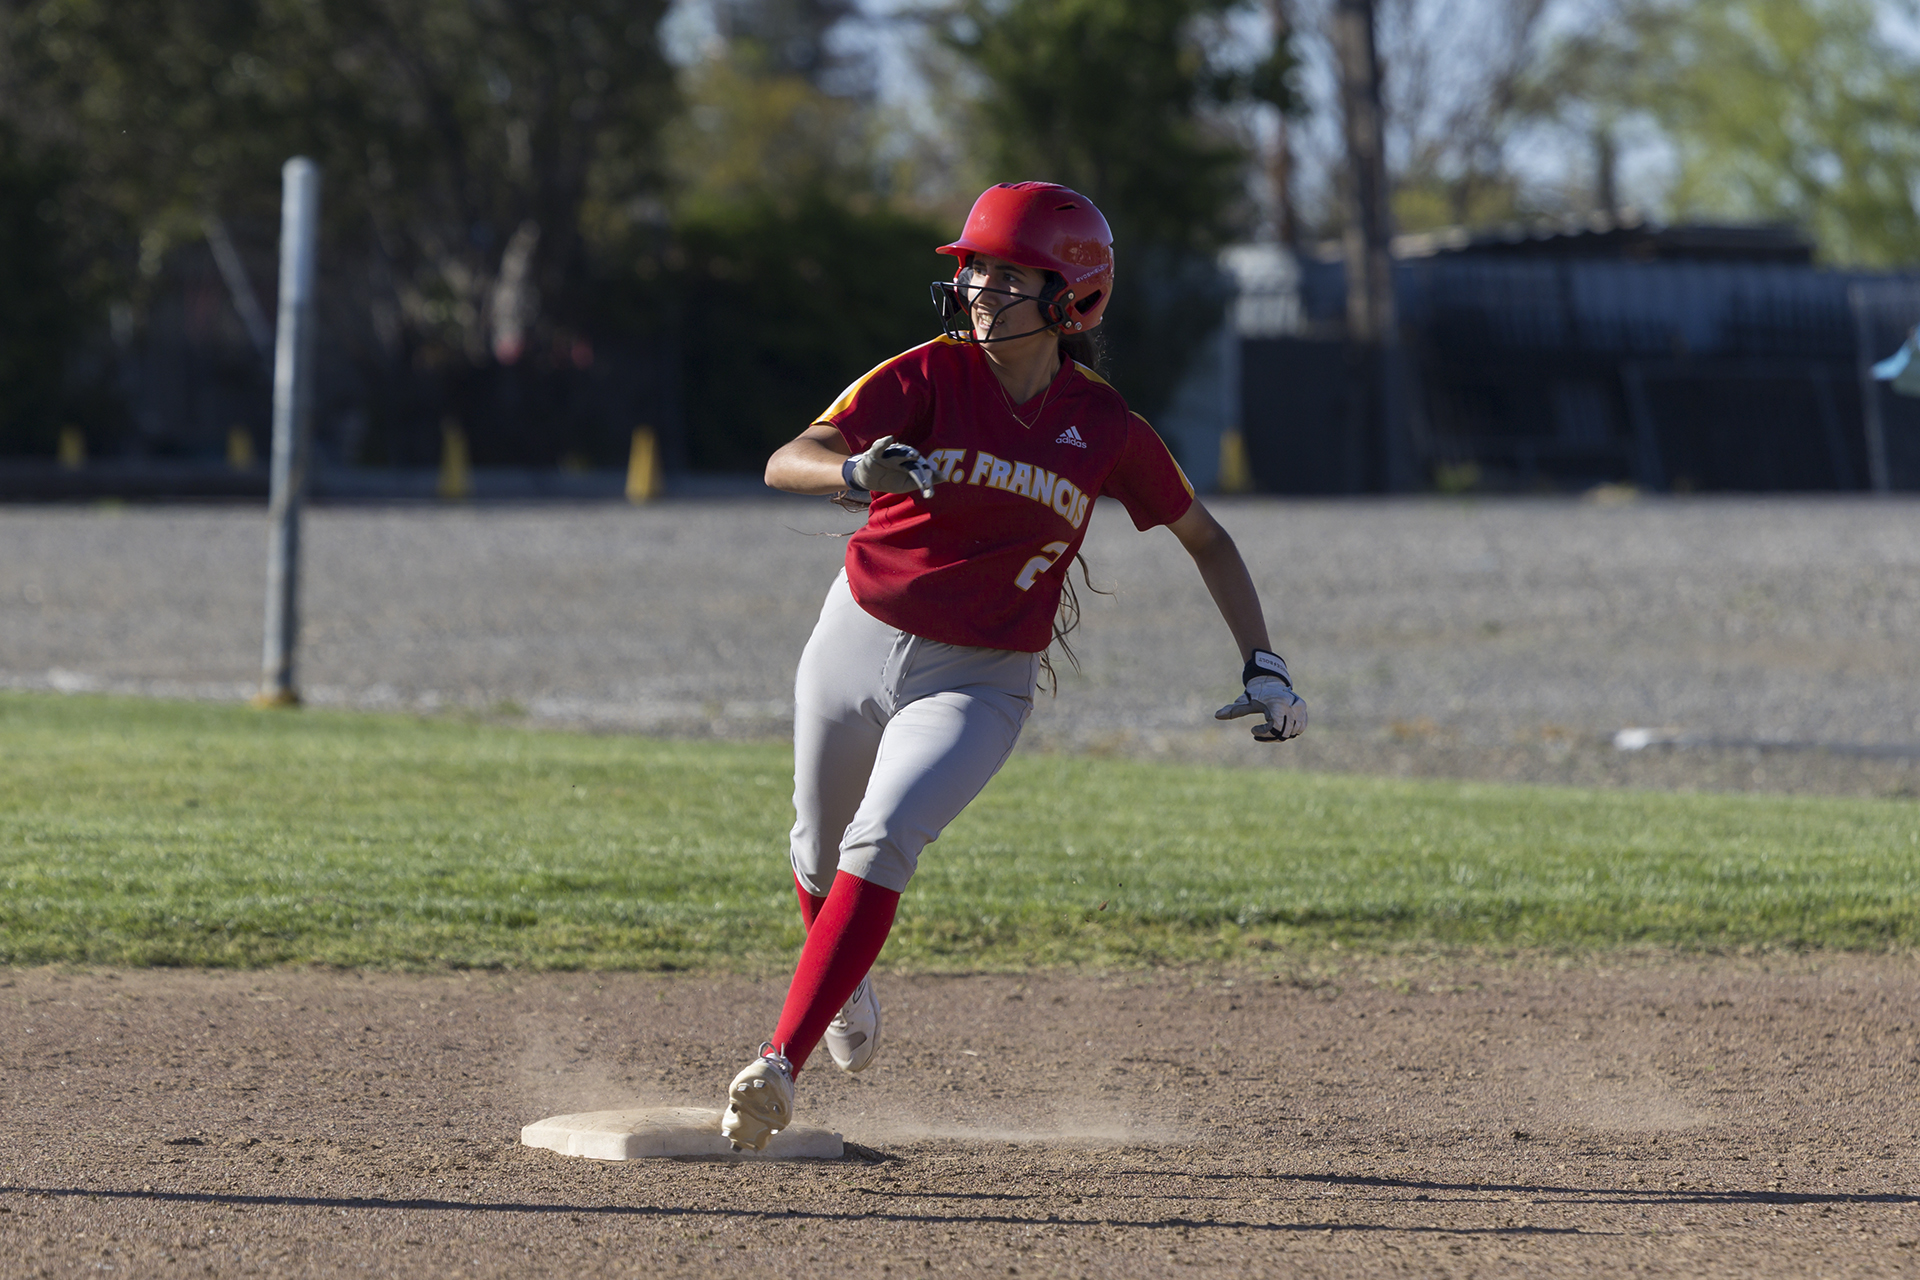 Alcantar's bat supports Imm's shutout in JV victory